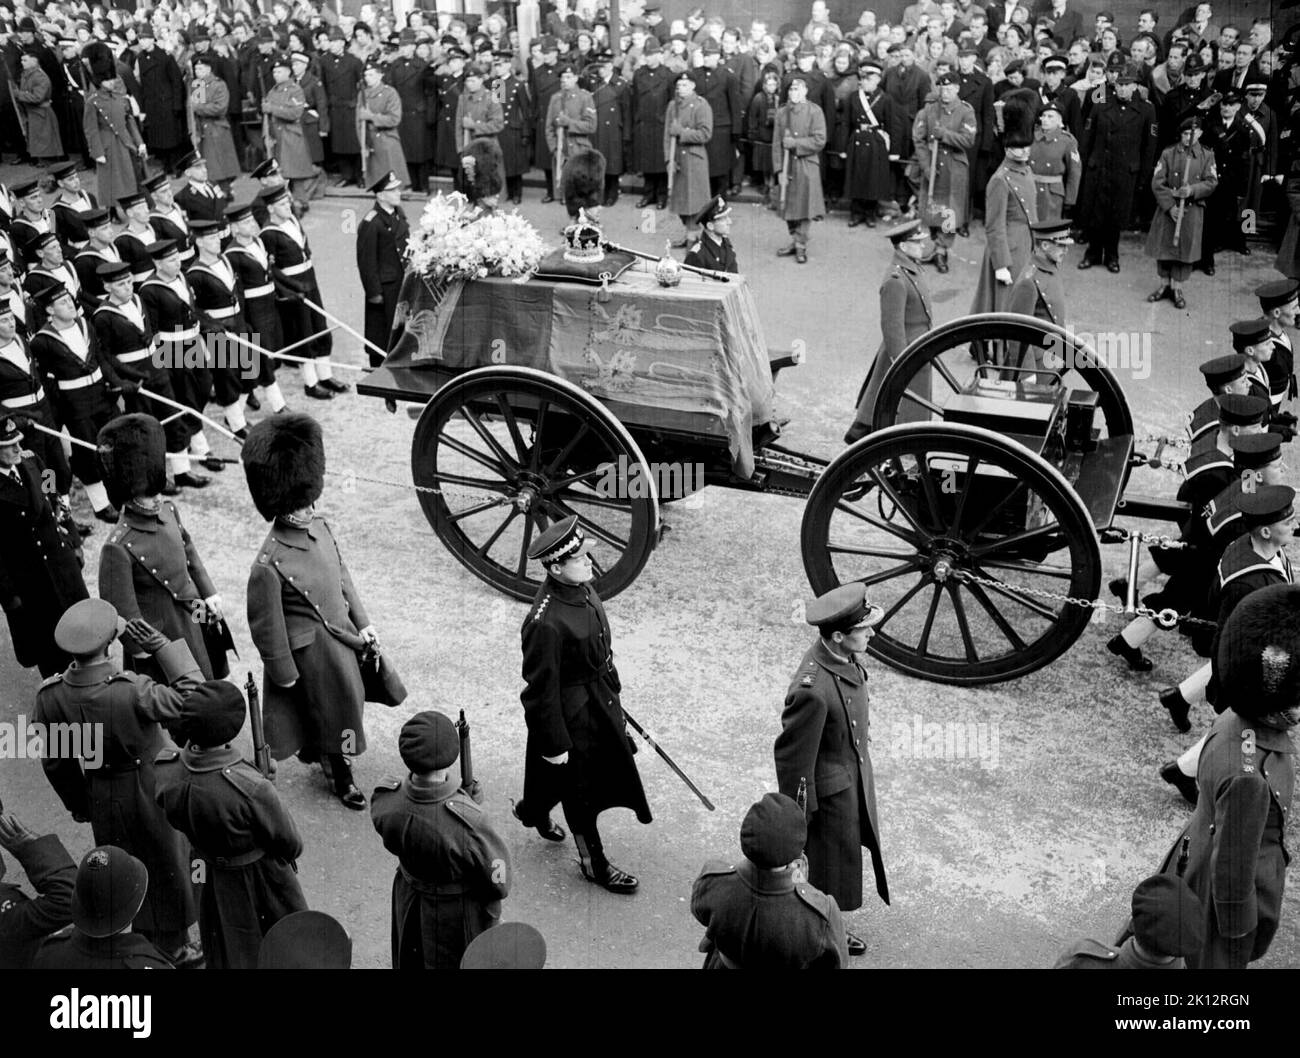 File photo dated 15/2/1952 of the final journey of King George VI, when his coffin was taken in procession from Windsor Railway Station to the funeral service in St. George's Chapel. Non-commissioned sailors, Naval ratings, traditionally pull the gun carriage bearing the sovereign's coffin through the streets using ropes, a practice which will take place during the Queen's funeral. The custom was adopted in 1901 at Victoria's funeral when the splinter bar of the gun carriage broke as her coffin, weighing nearly half a ton, was lifted into place and the horses began to move. The naval guard of  Stock Photo